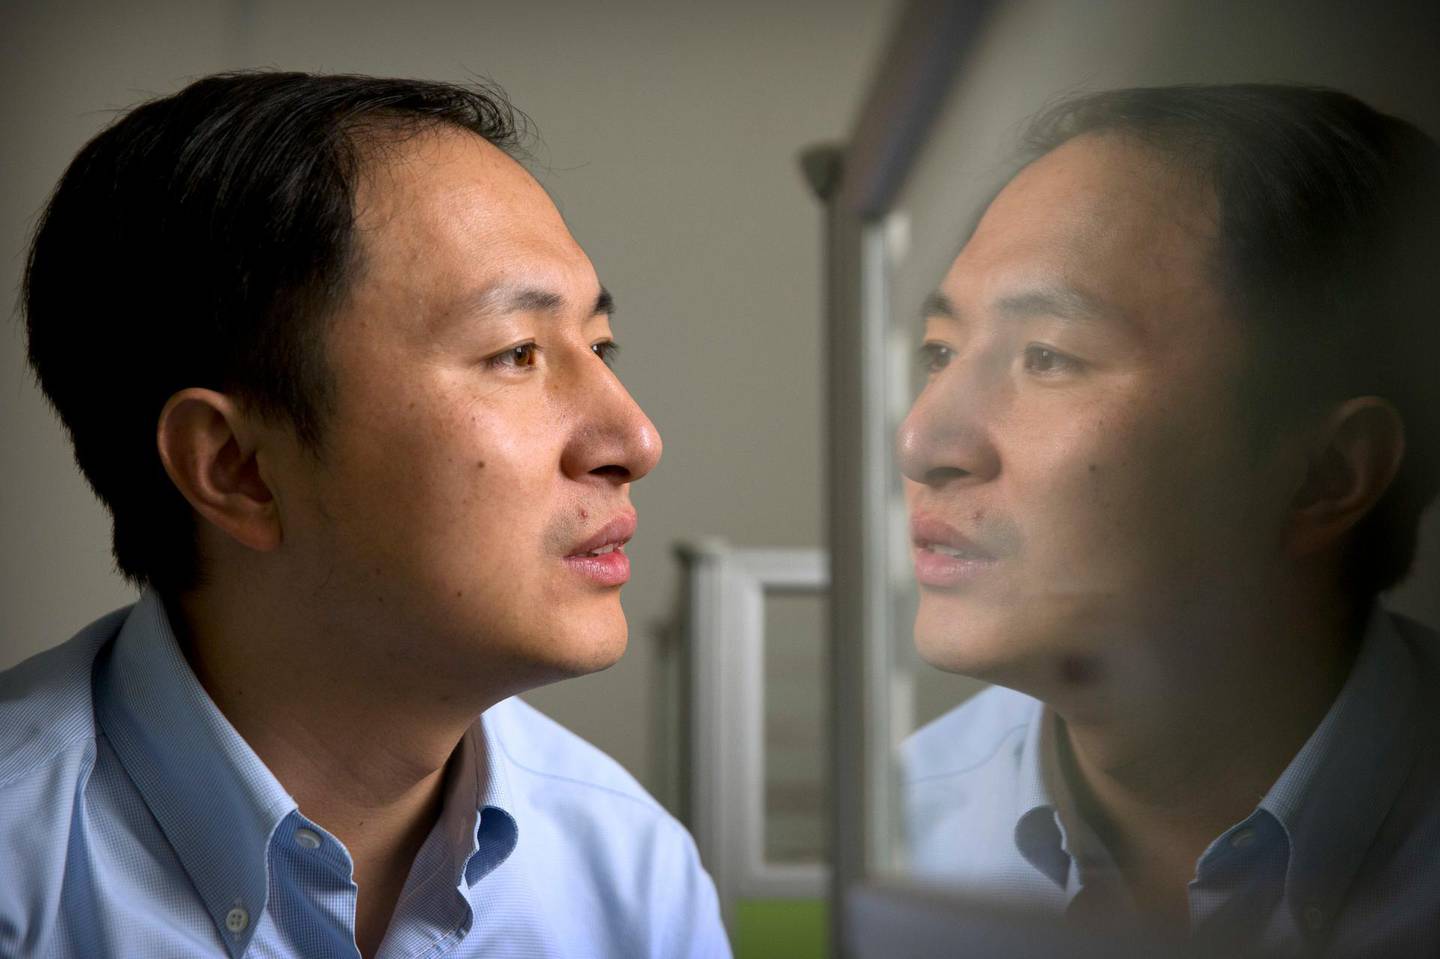 In this Oct. 10, 2018 photo, He Jiankui is reflected in a glass panel as he works at a computer at a laboratory in Shenzhen in southern China's Guangdong province. Chinese scientist He claims he helped make world's first genetically edited babies: twin girls whose DNA he said he altered. He revealed it Monday, Nov. 26, in Hong Kong to one of the organizers of an international conference on gene editing. (AP Photo/Mark Schiefelbein)